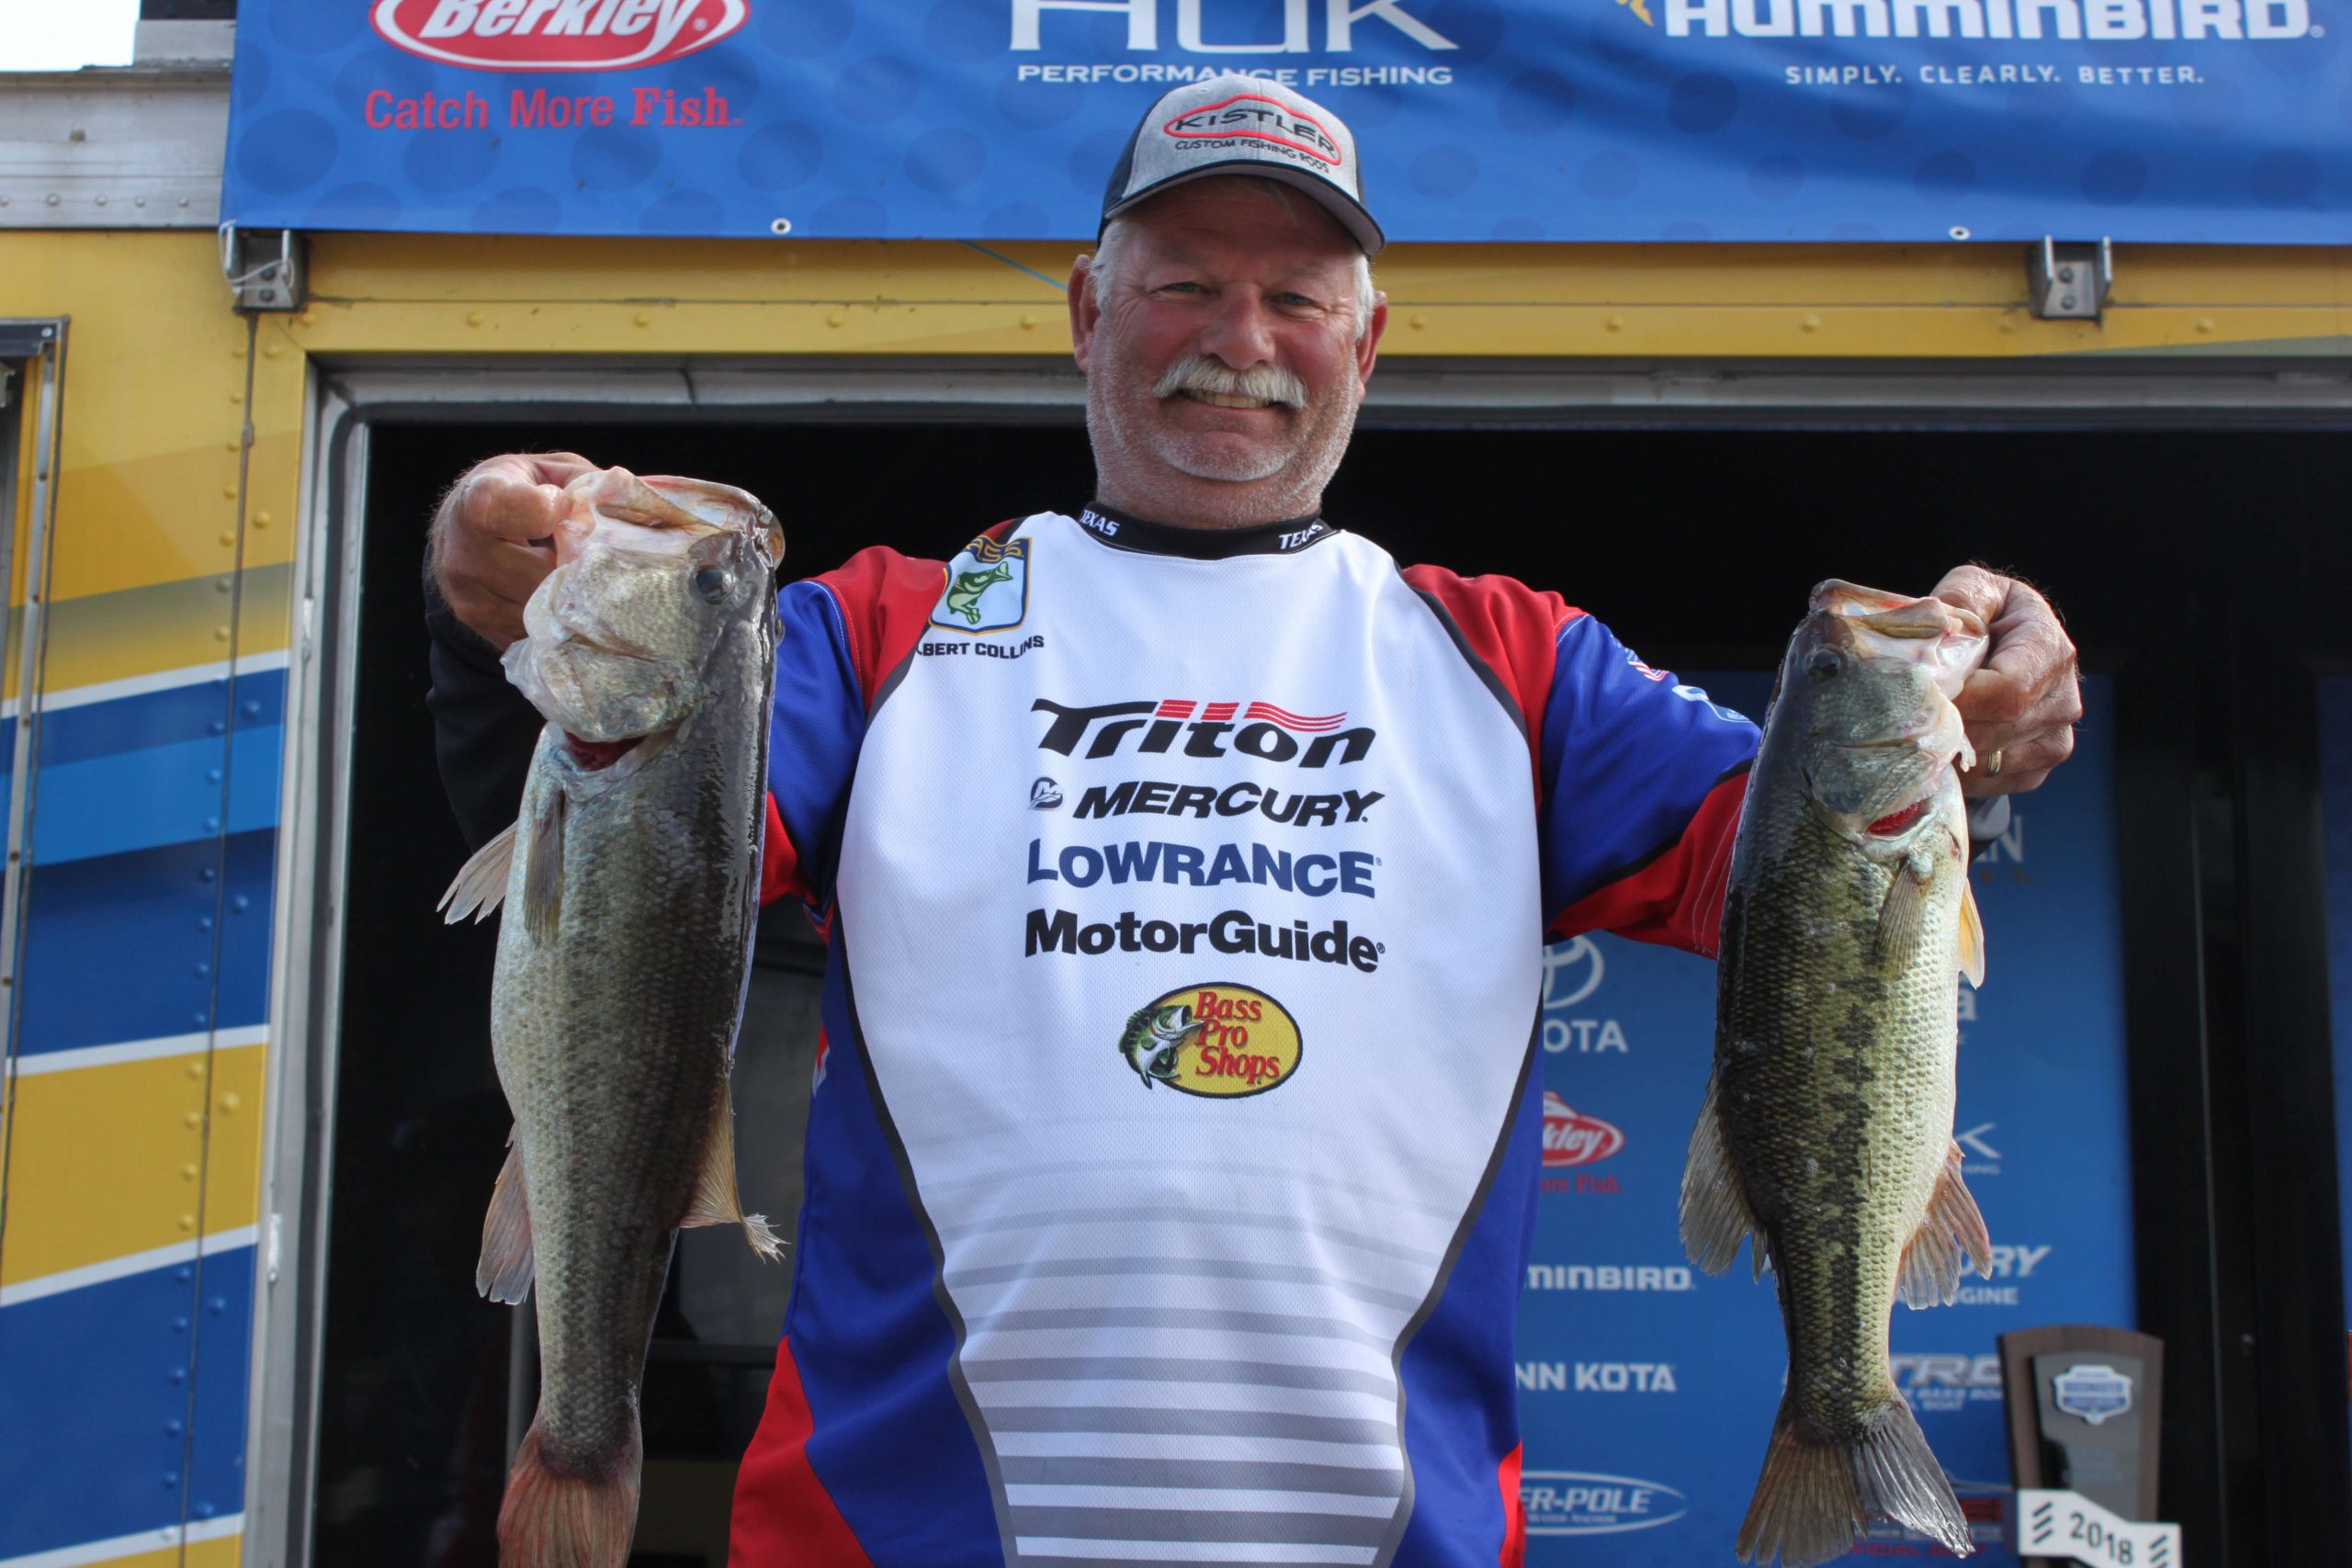 Albert Collins of Texas had a great regional, finishing in seventh place in the boater division with 49 pounds.